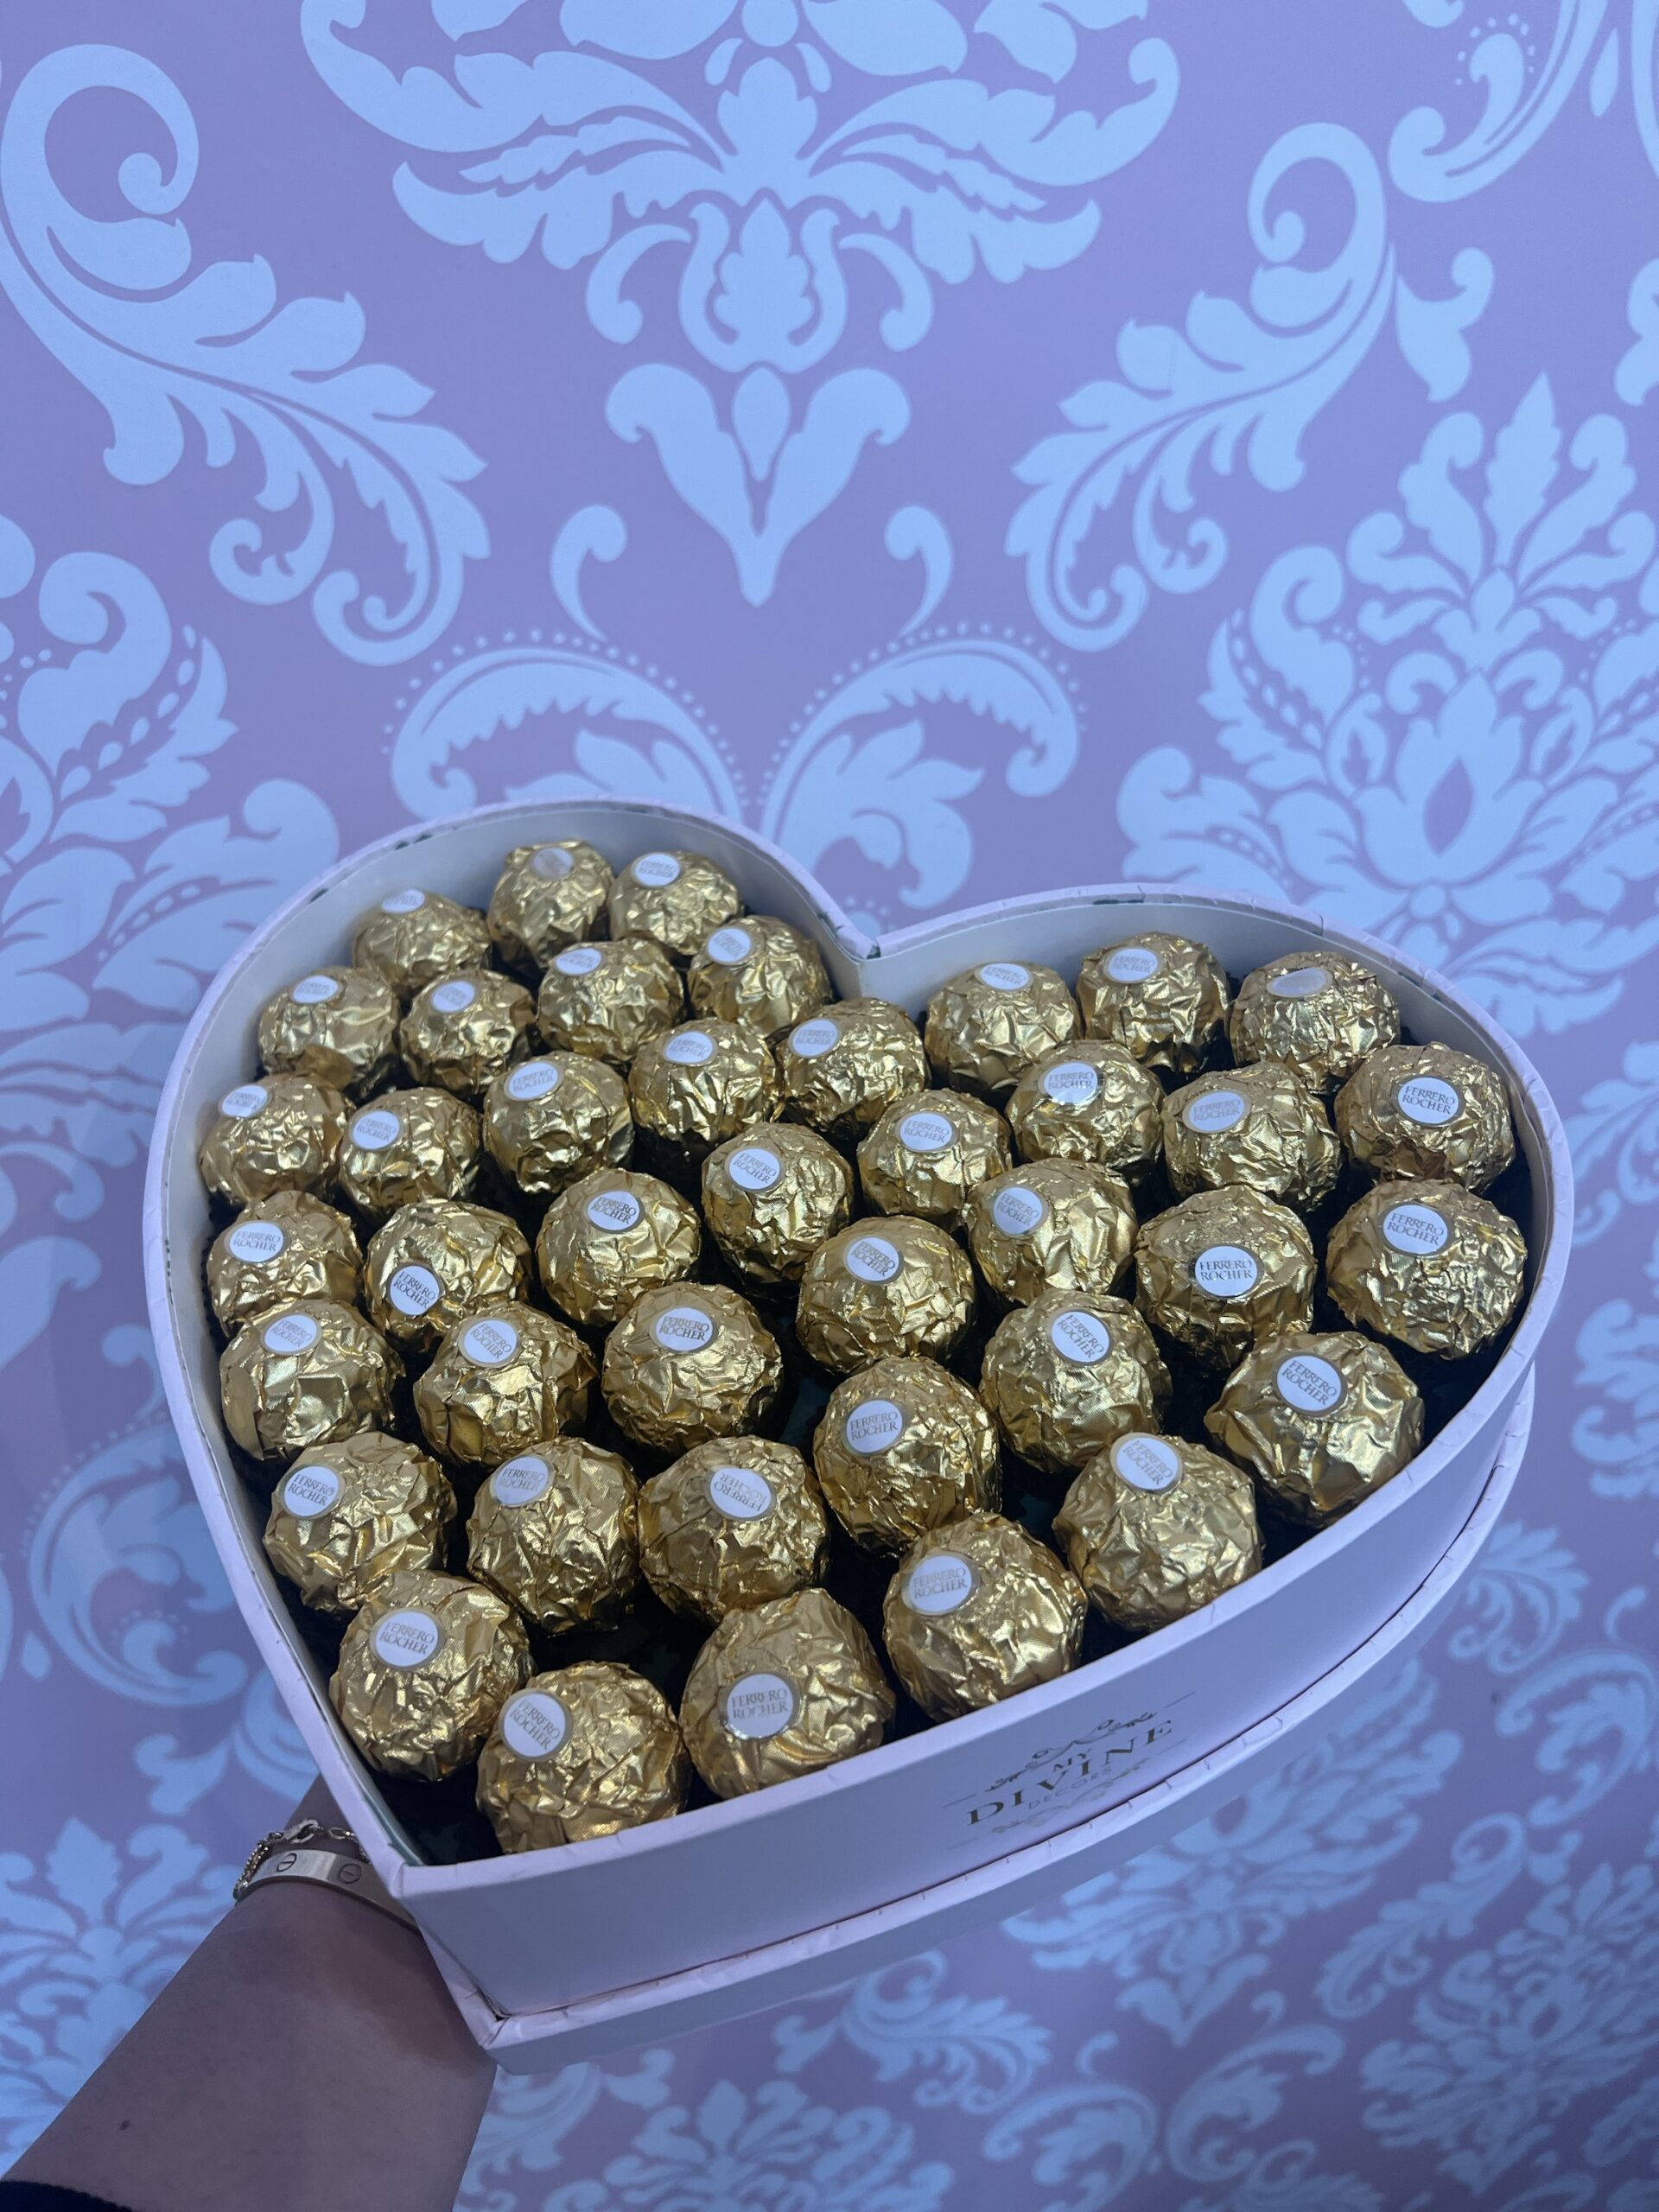 Ferrero Rocher chocolates were inspired by the Virgin Mary